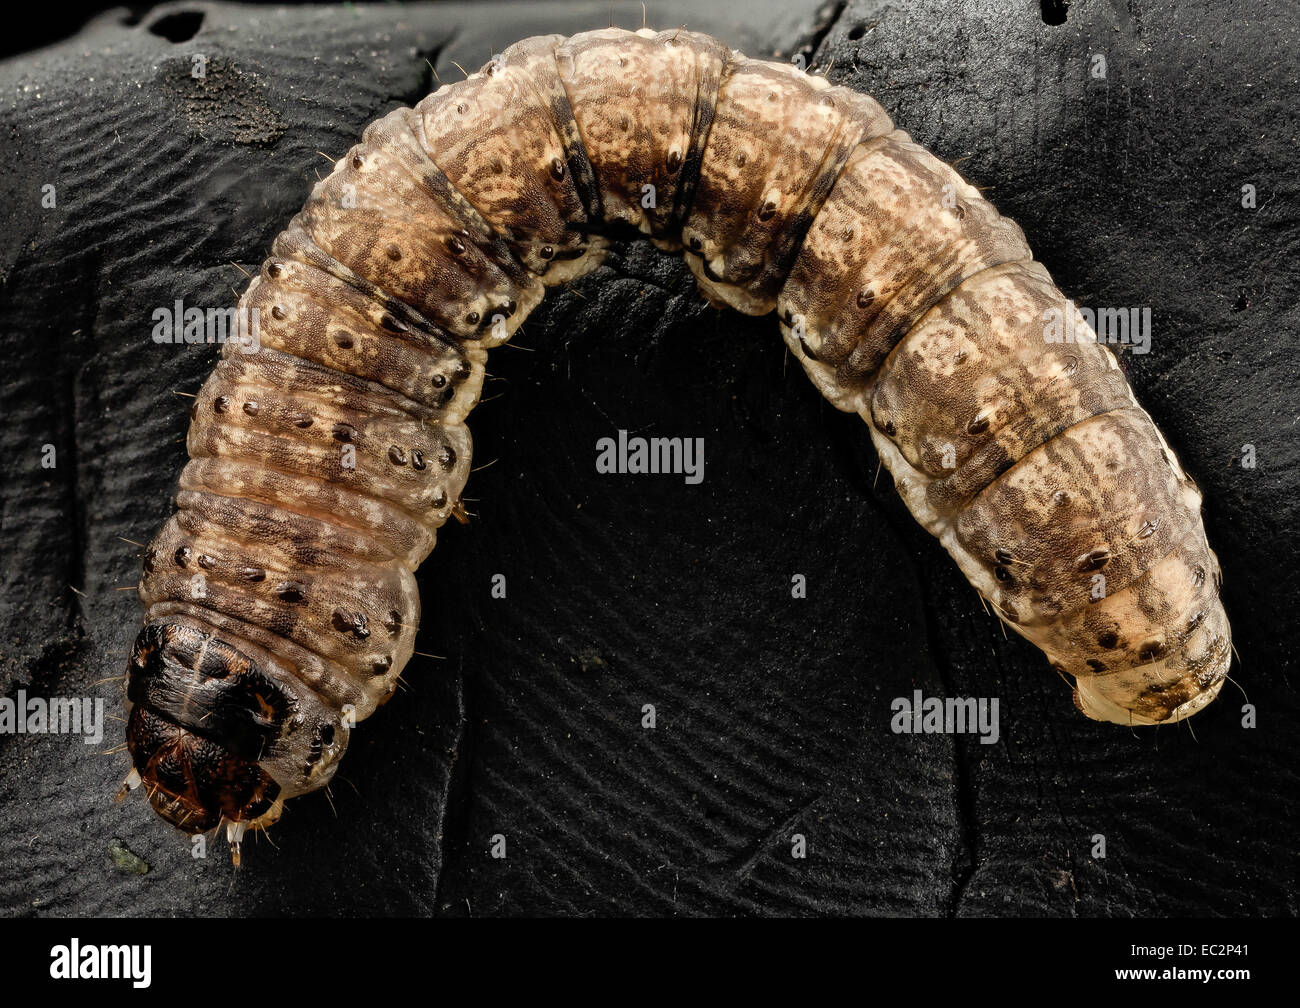 black cutworm, curled 2014-06-04-19.18.49 ZS PMax black cutworm, curled 2014-06-04-191849 Z Stock Photo